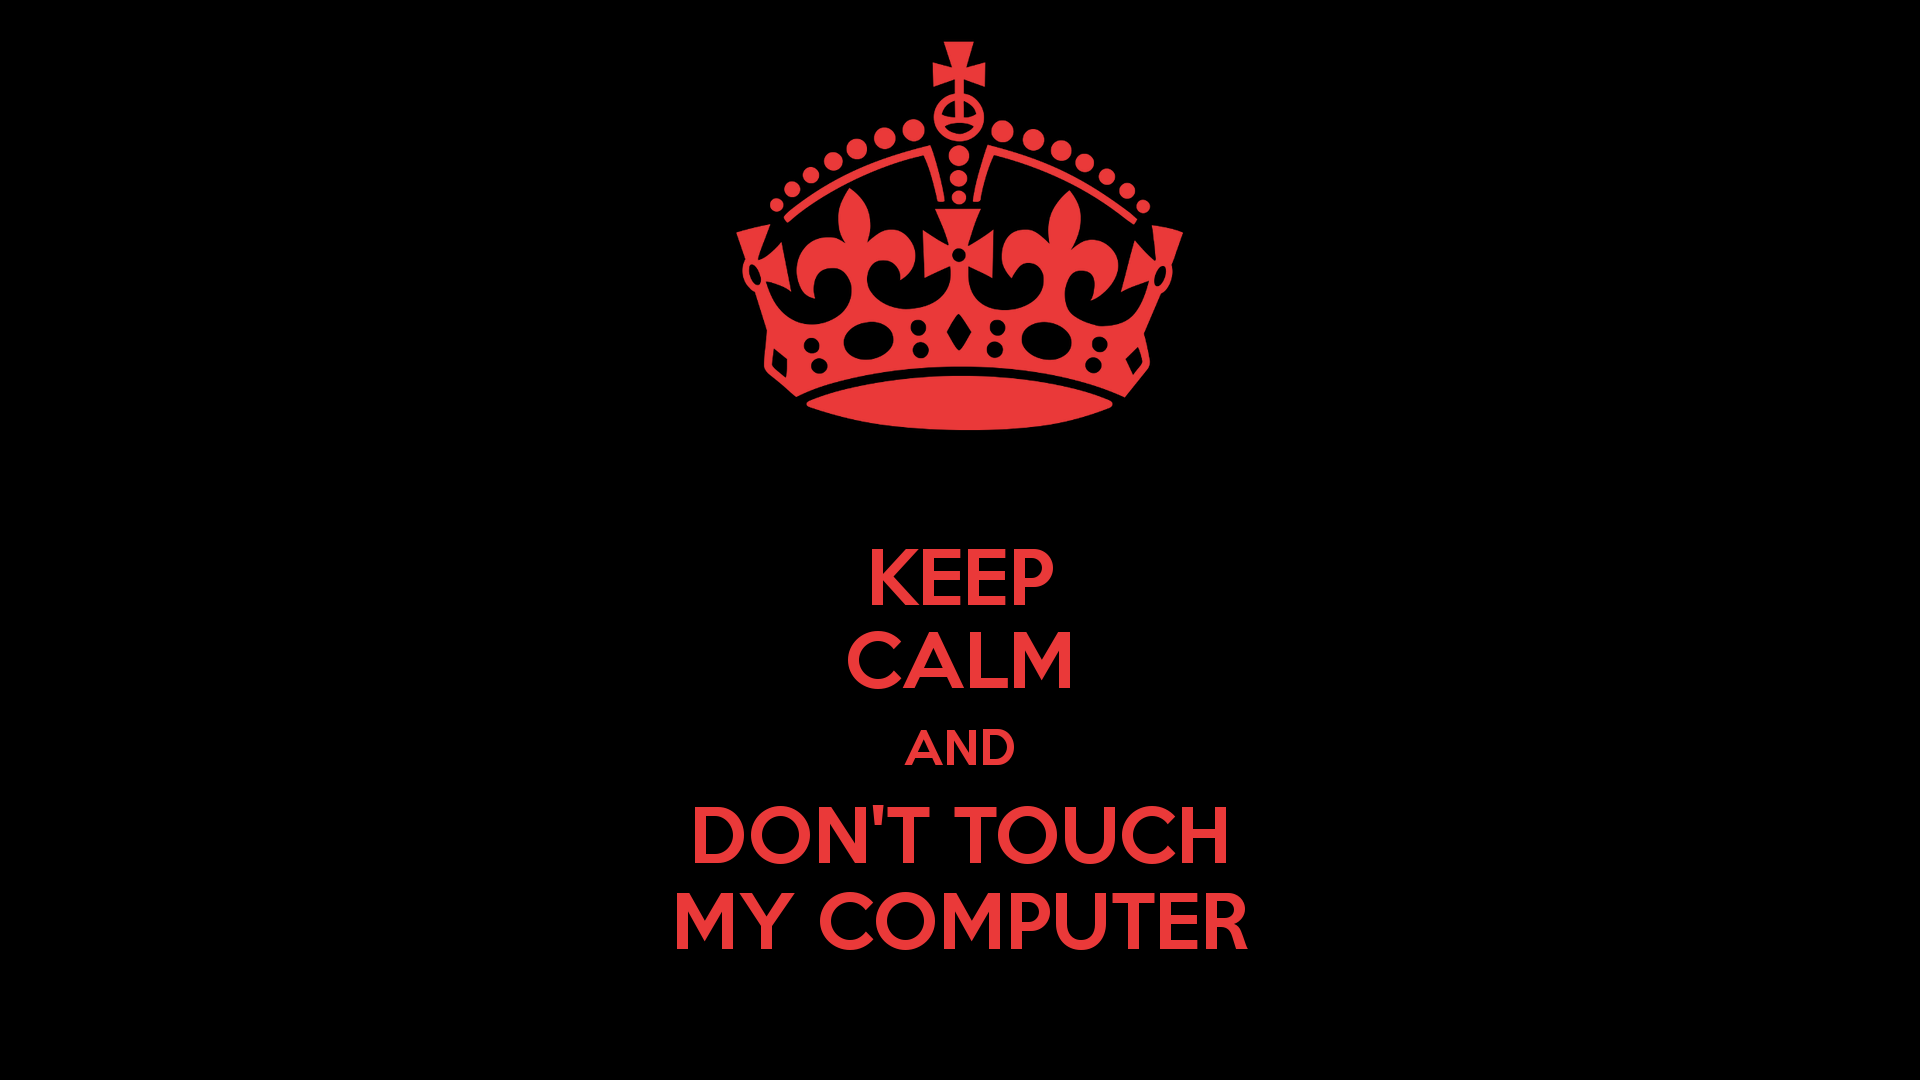 KEEP CALM AND DONT TOUCH MY COMPUTER   KEEP CALM AND CARRY ON Image